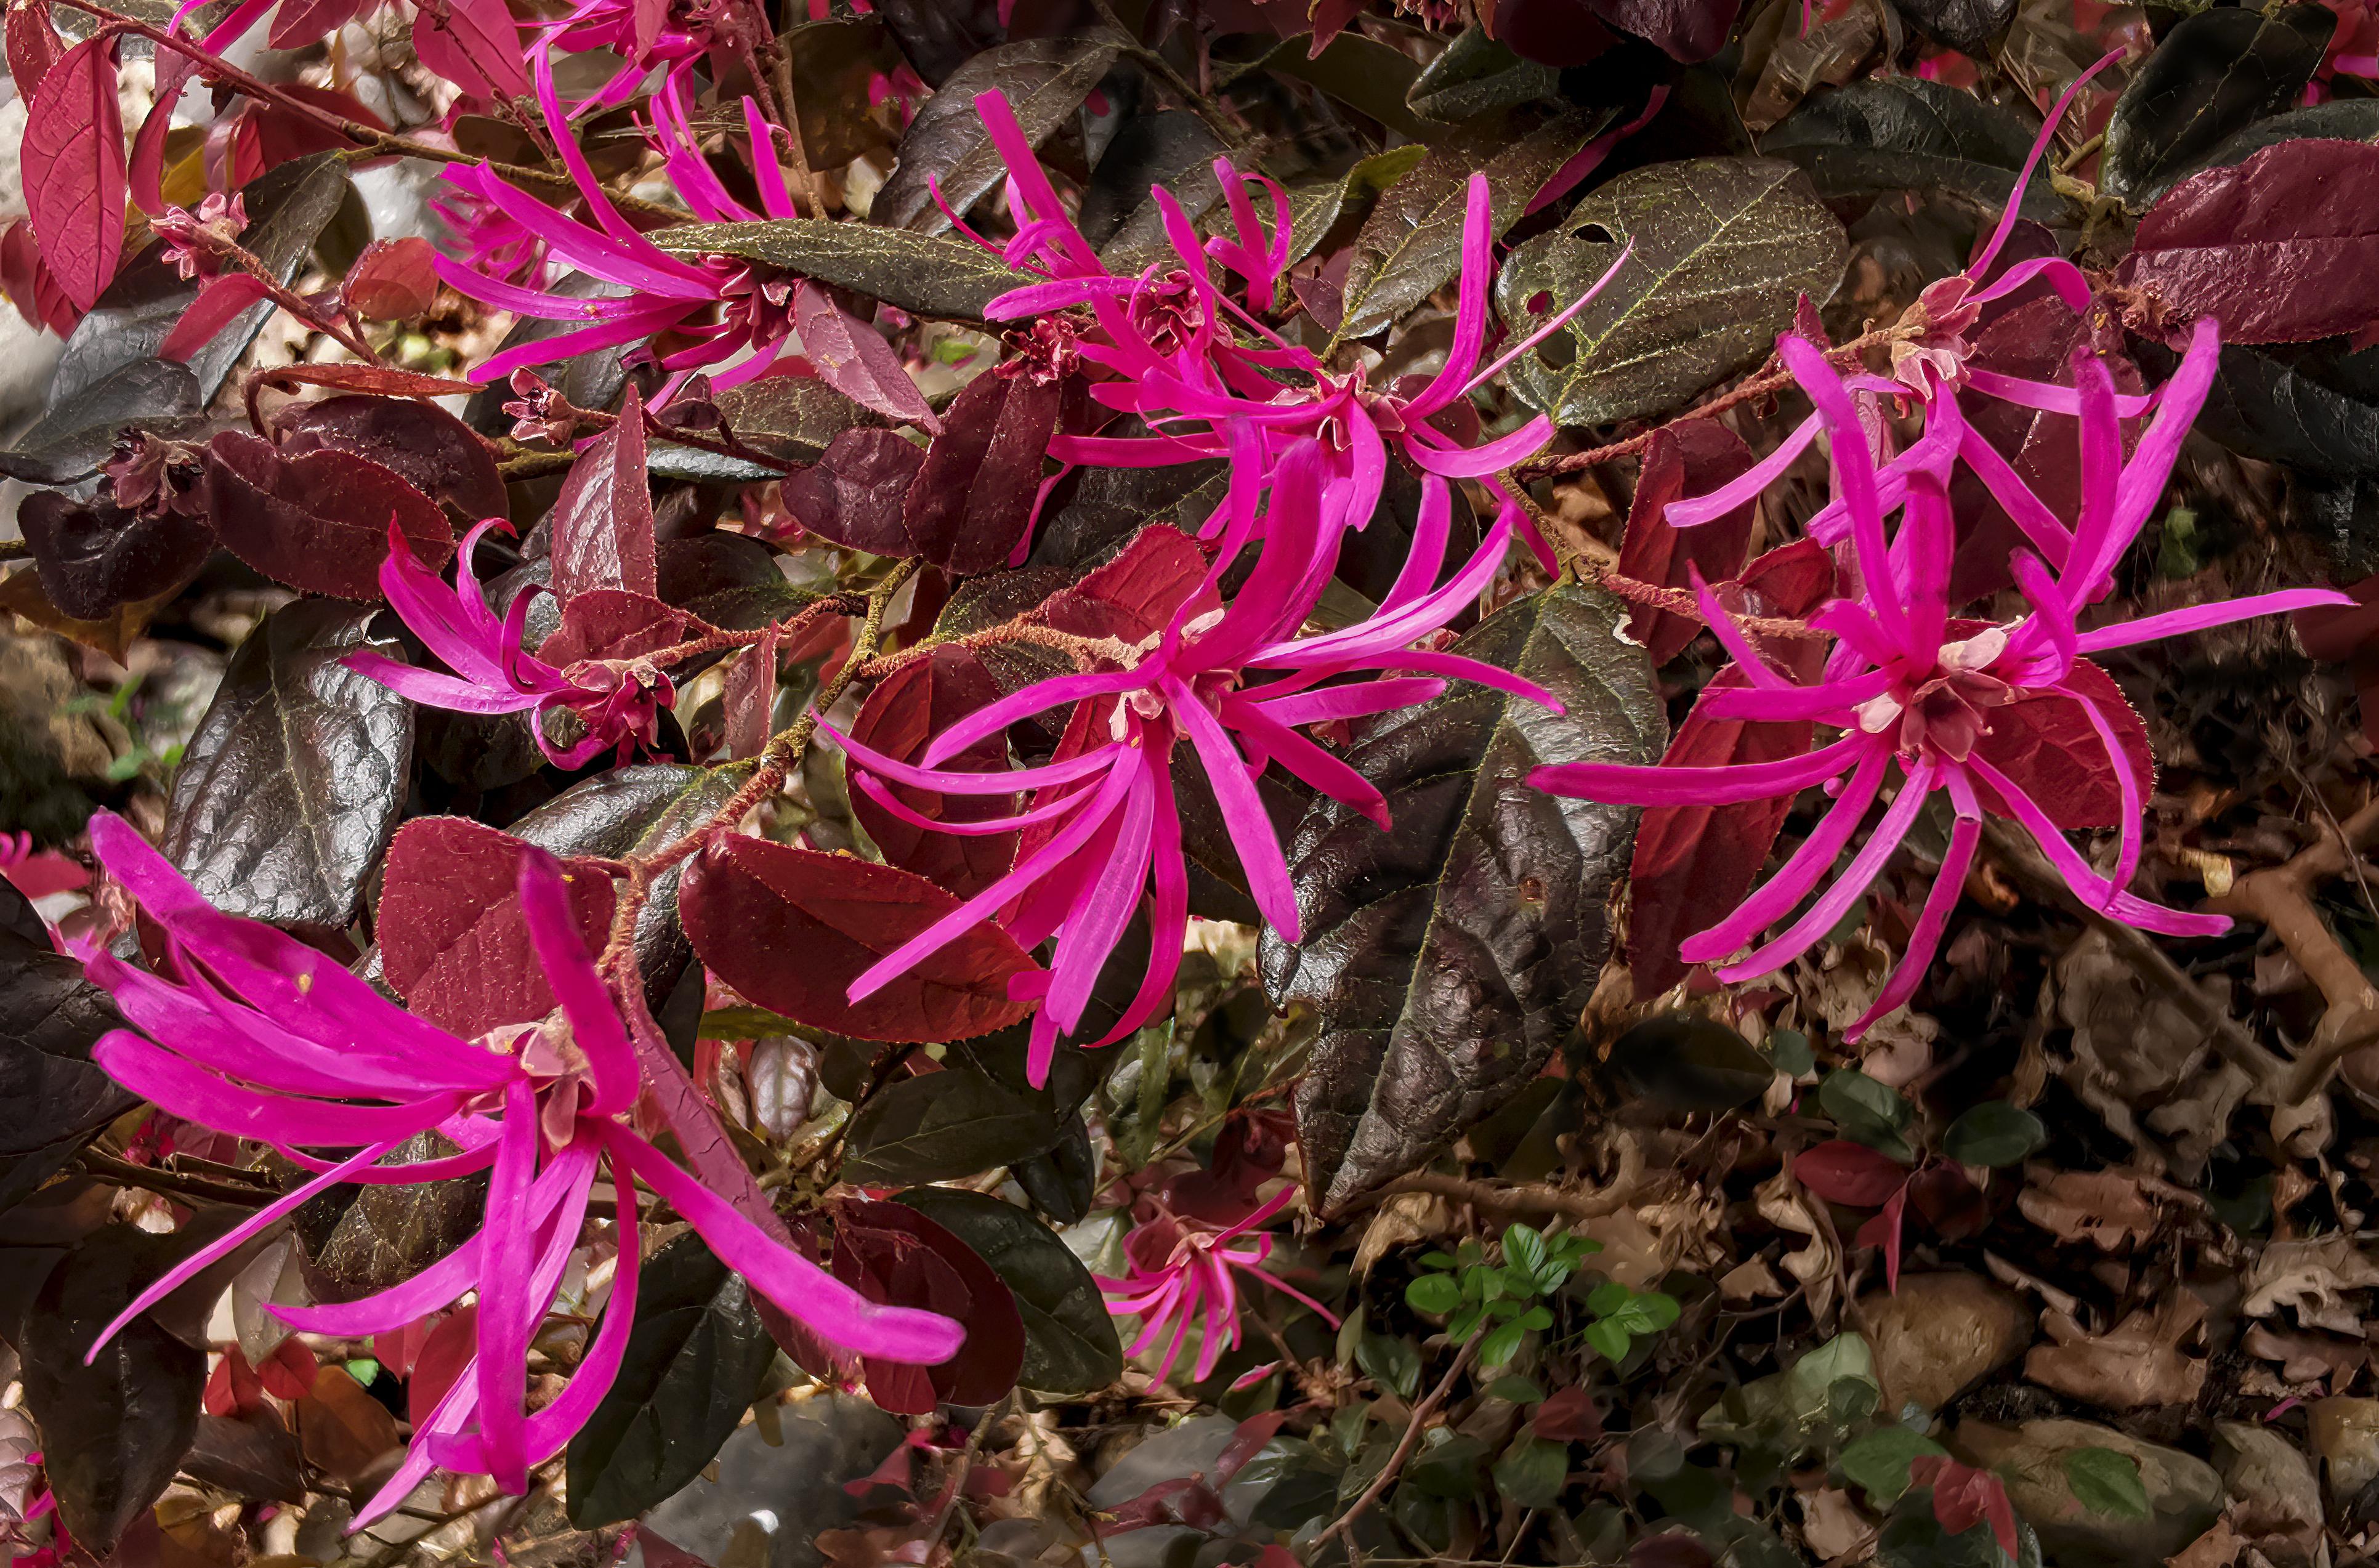 Magenta flowers with pink sepal and stems, olive-burgundy leaves, yellow midrib and veins

